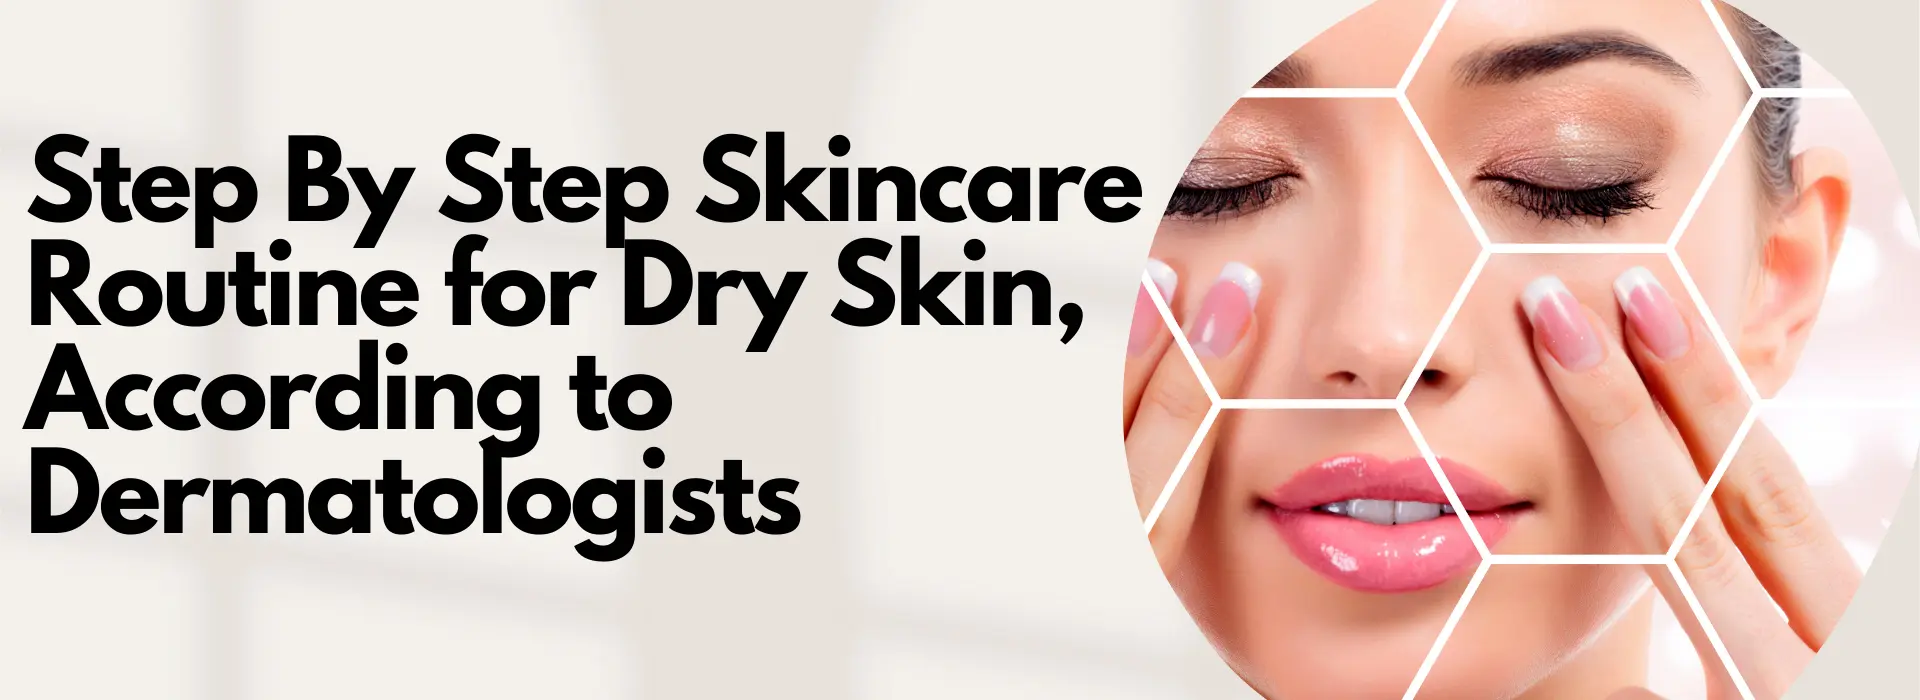 Step By Step Skincare Routine for Dry Skin, According to Dermatologists